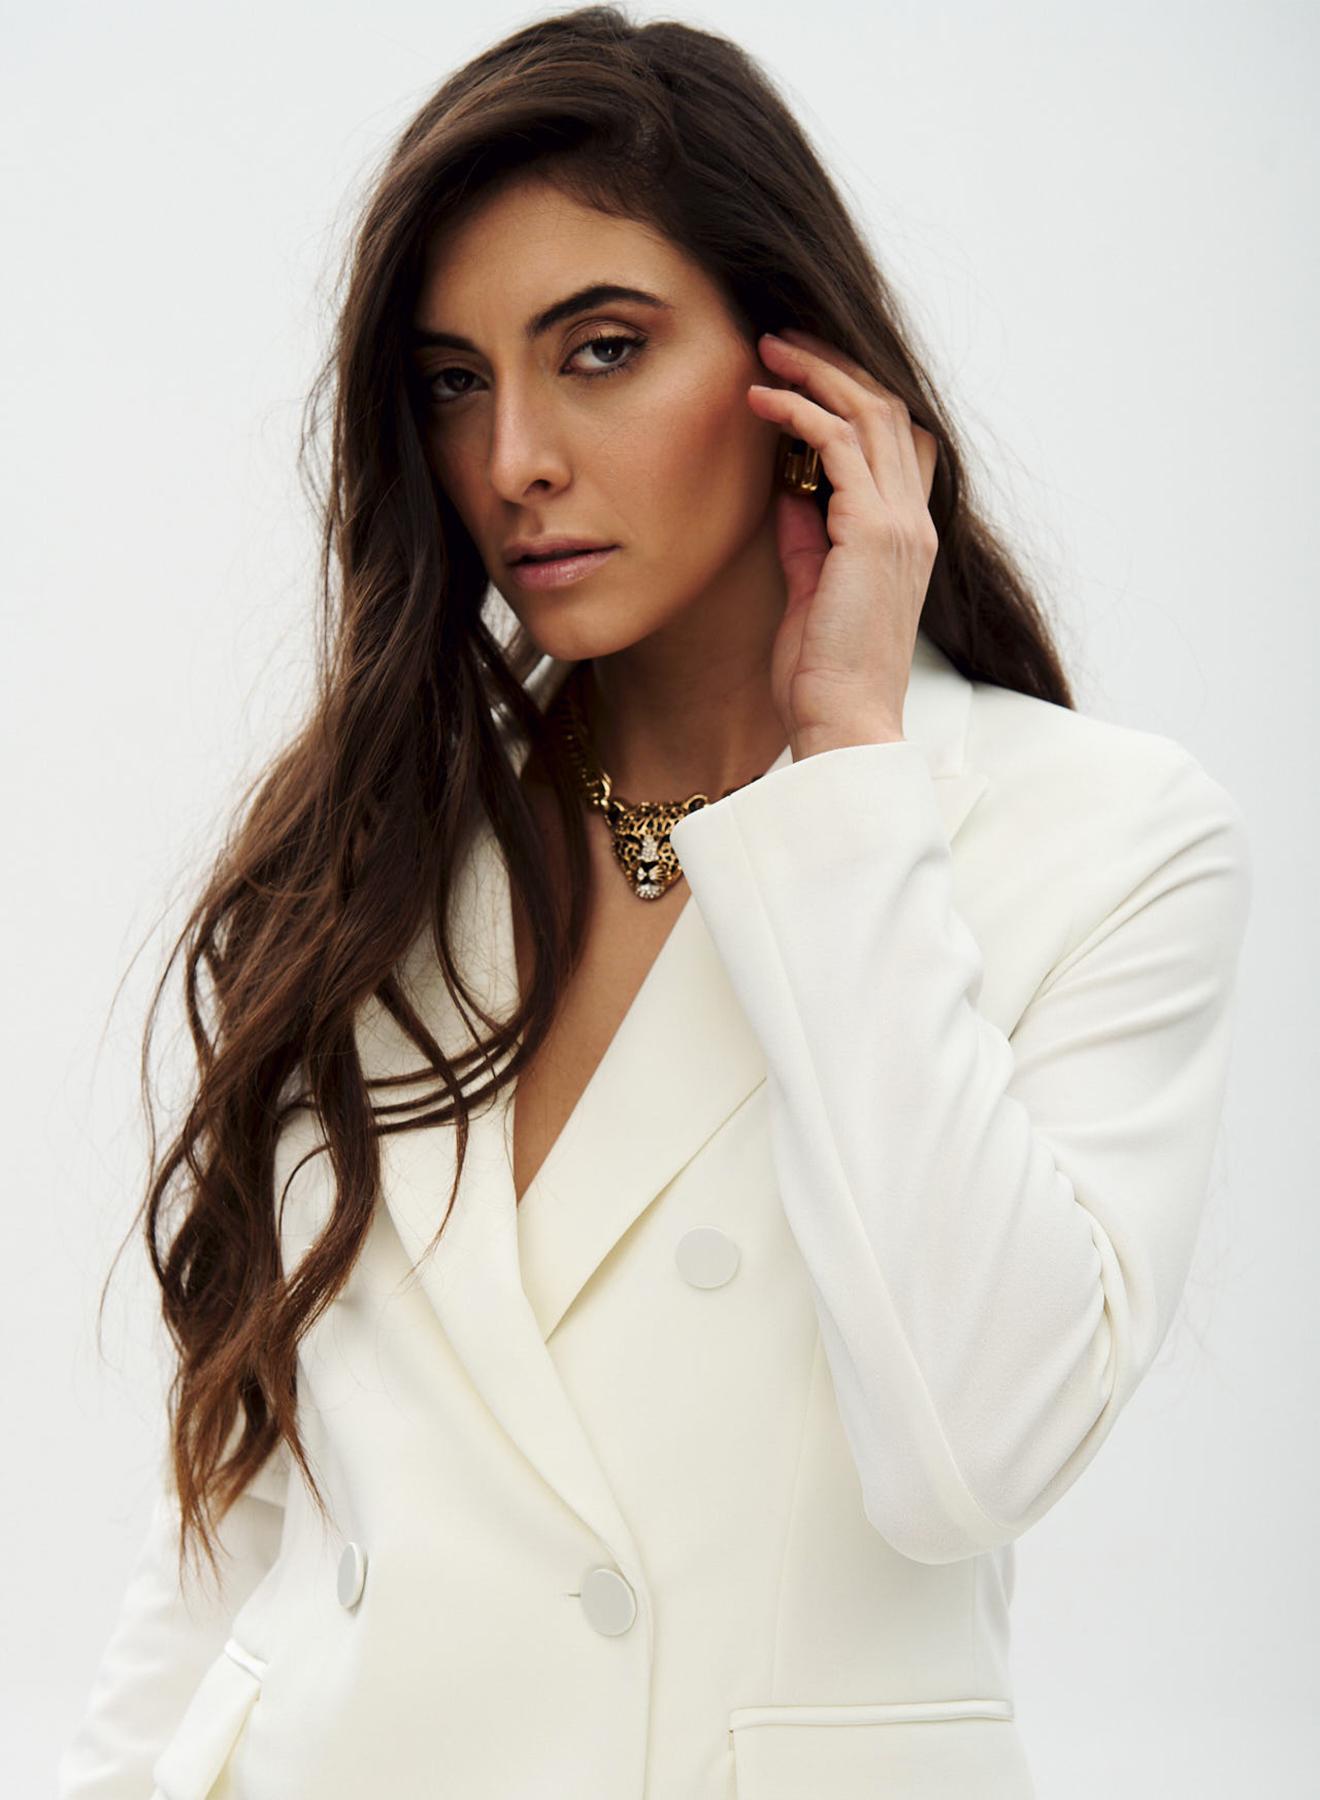 Double-breasted Blazer with satin lapel collar - 5